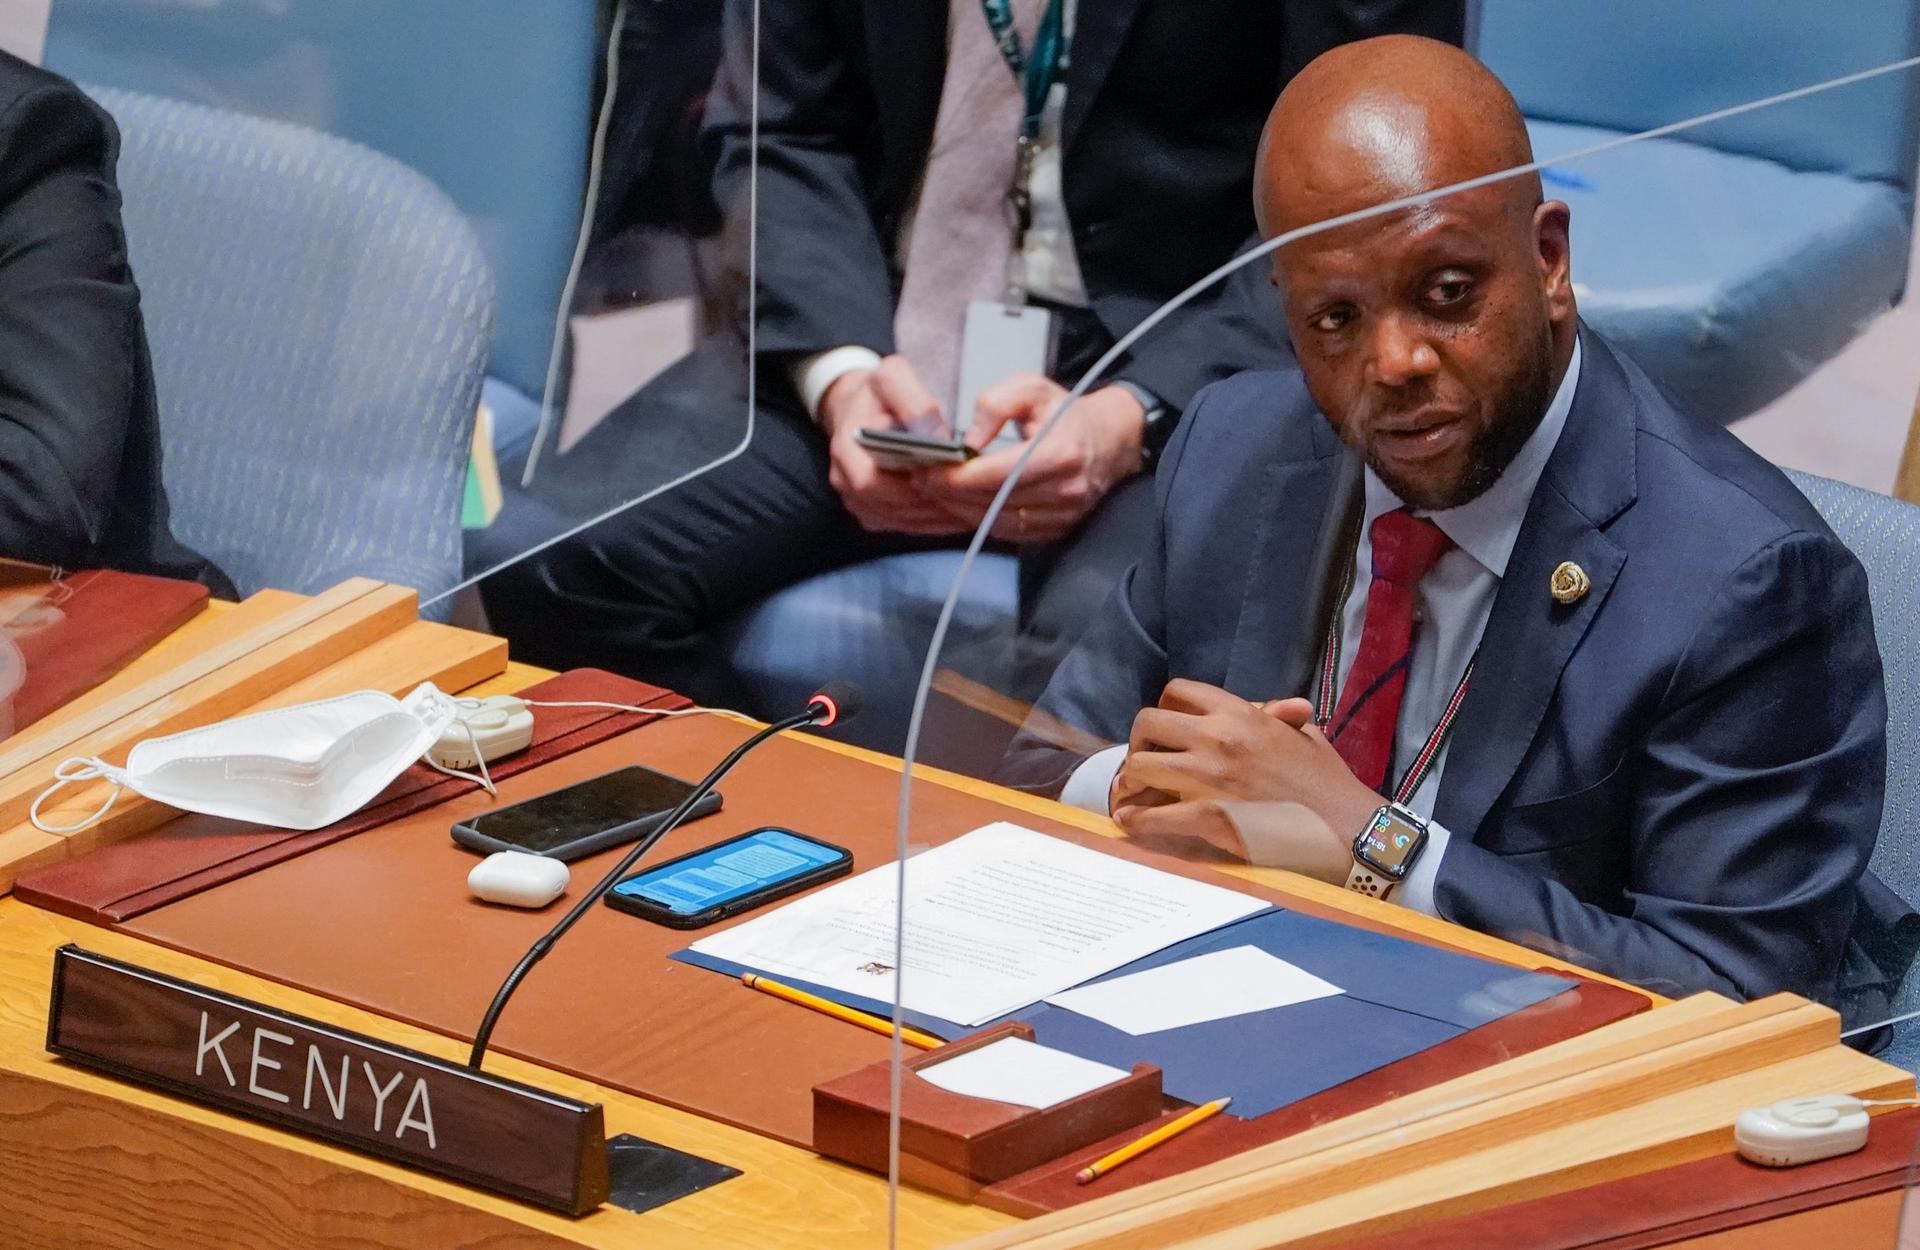 Kenya's Ambassador to the United Nations Martin Kimani addressed a United Nations Security Council meeting on the Russian invasion of Ukraine, on Feb. 25, 2022, at UN headquarters.